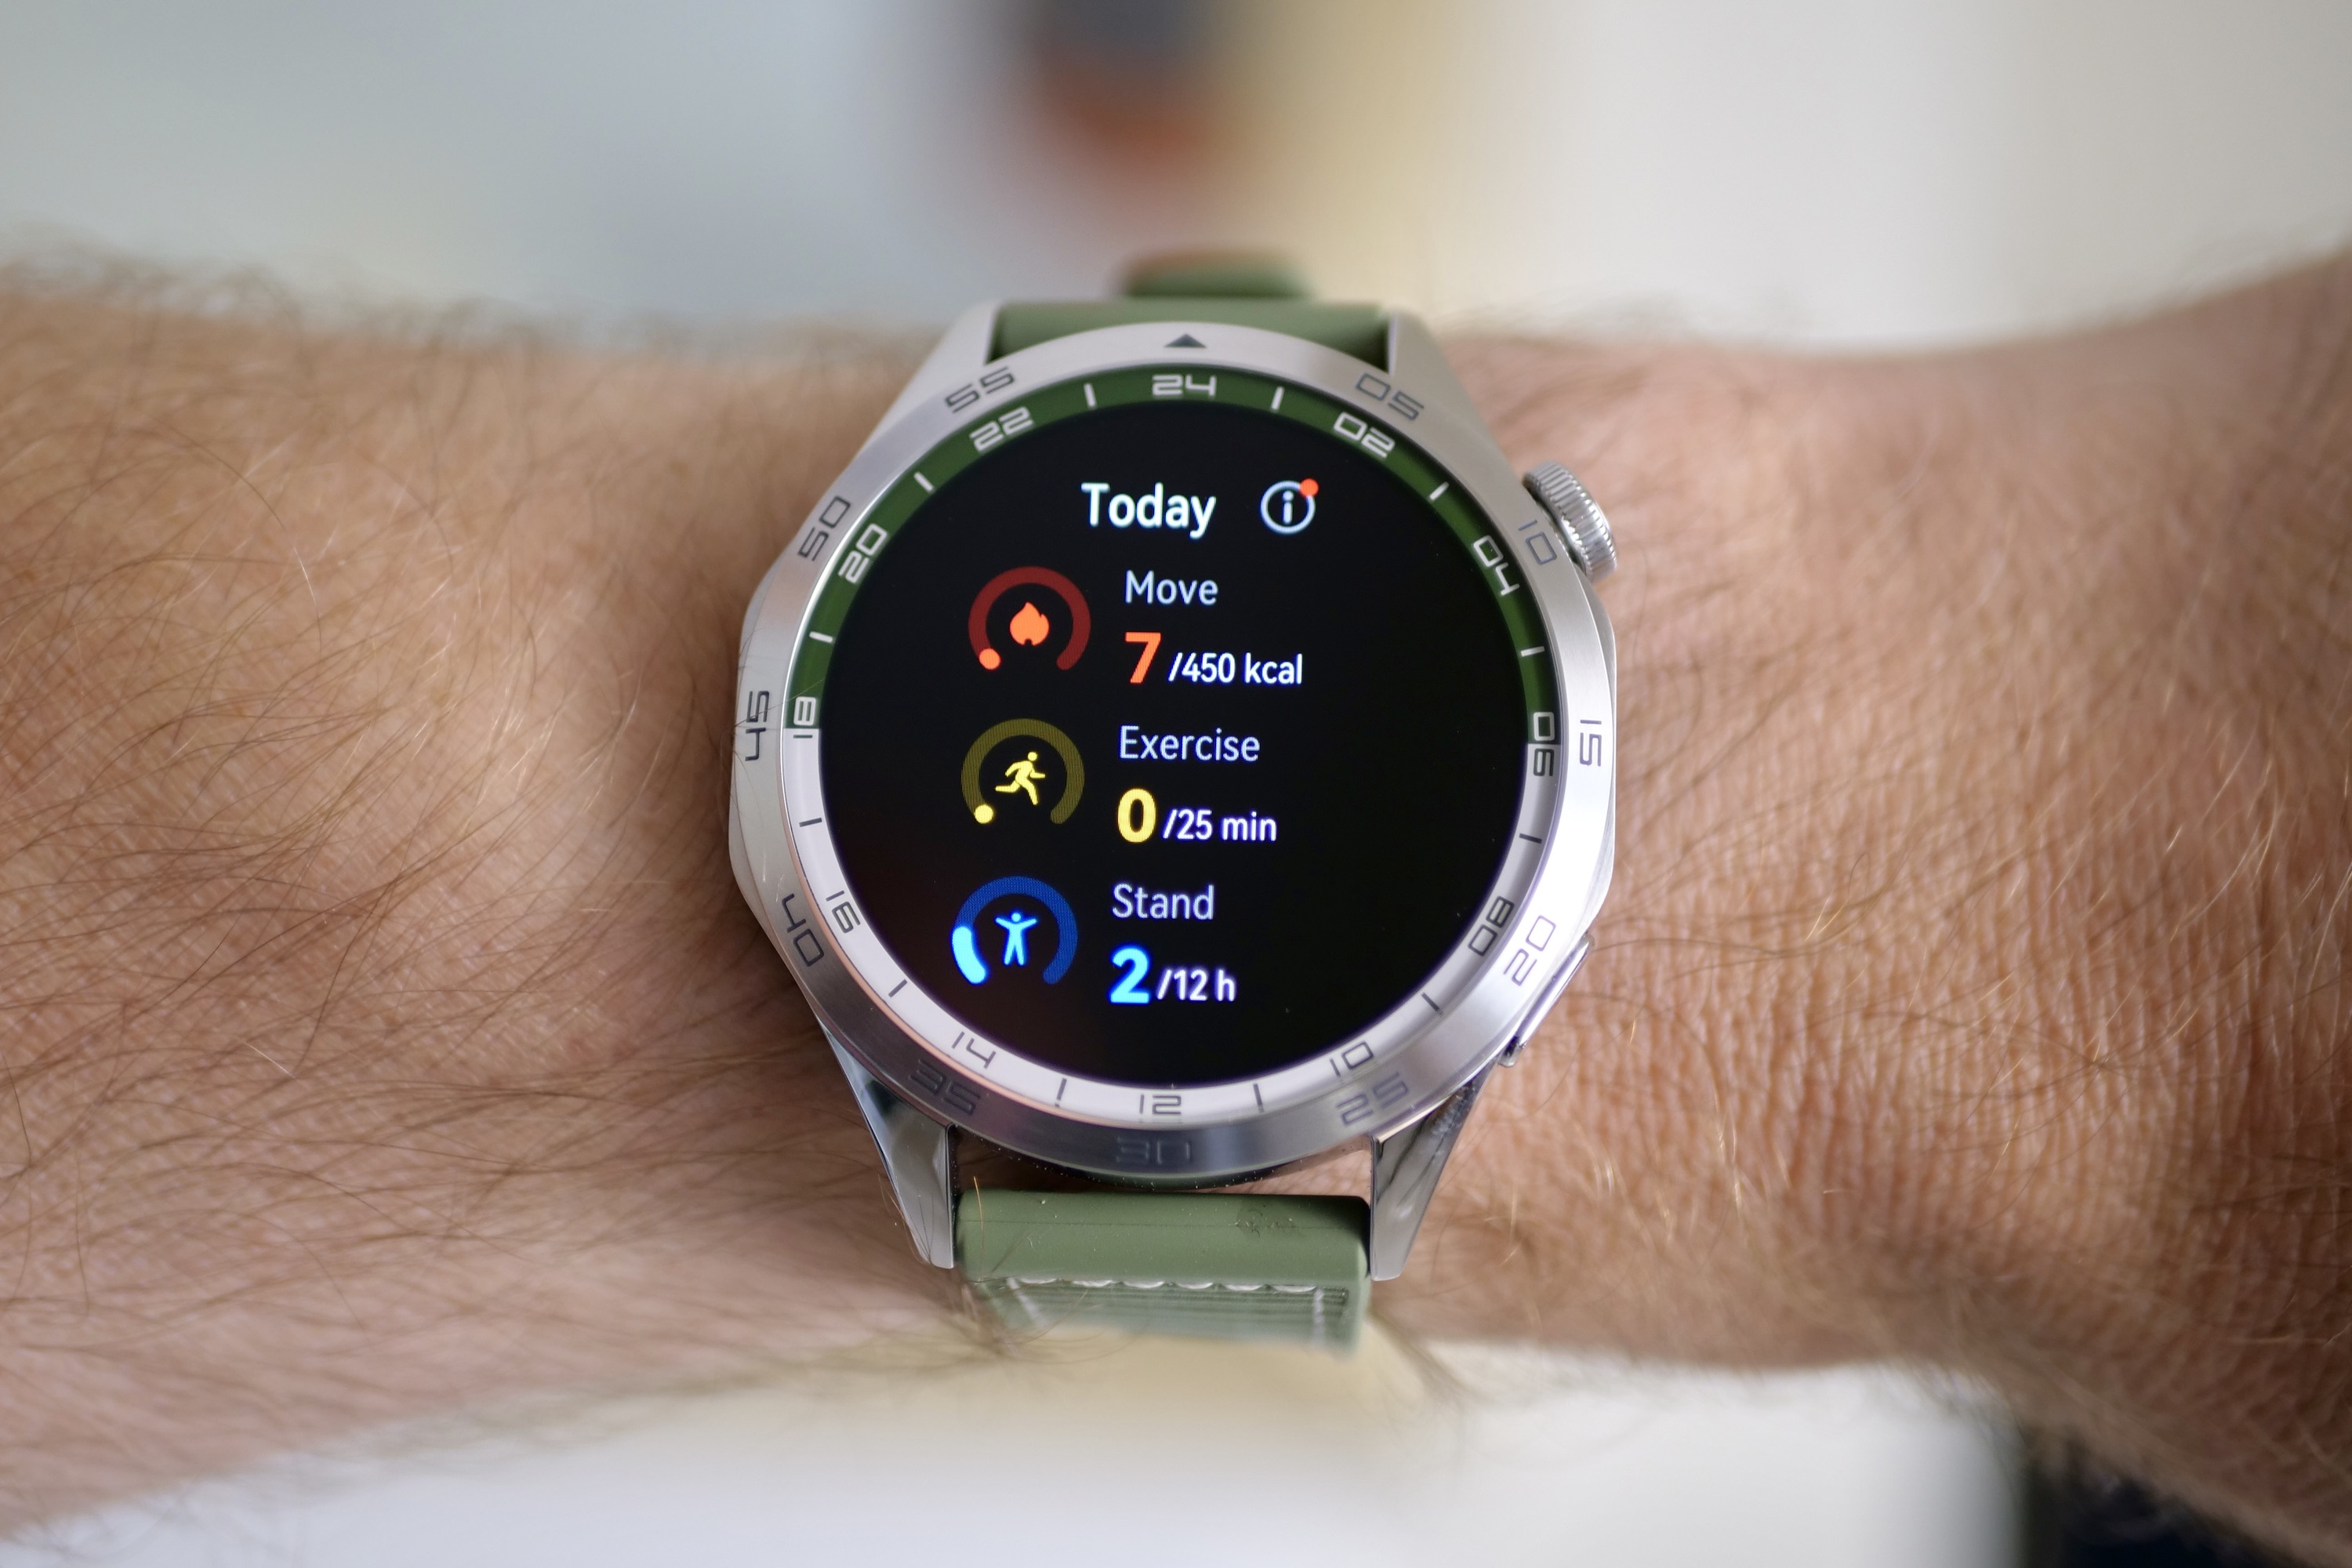 Buy this smartwatch, but only if you own a certain phone